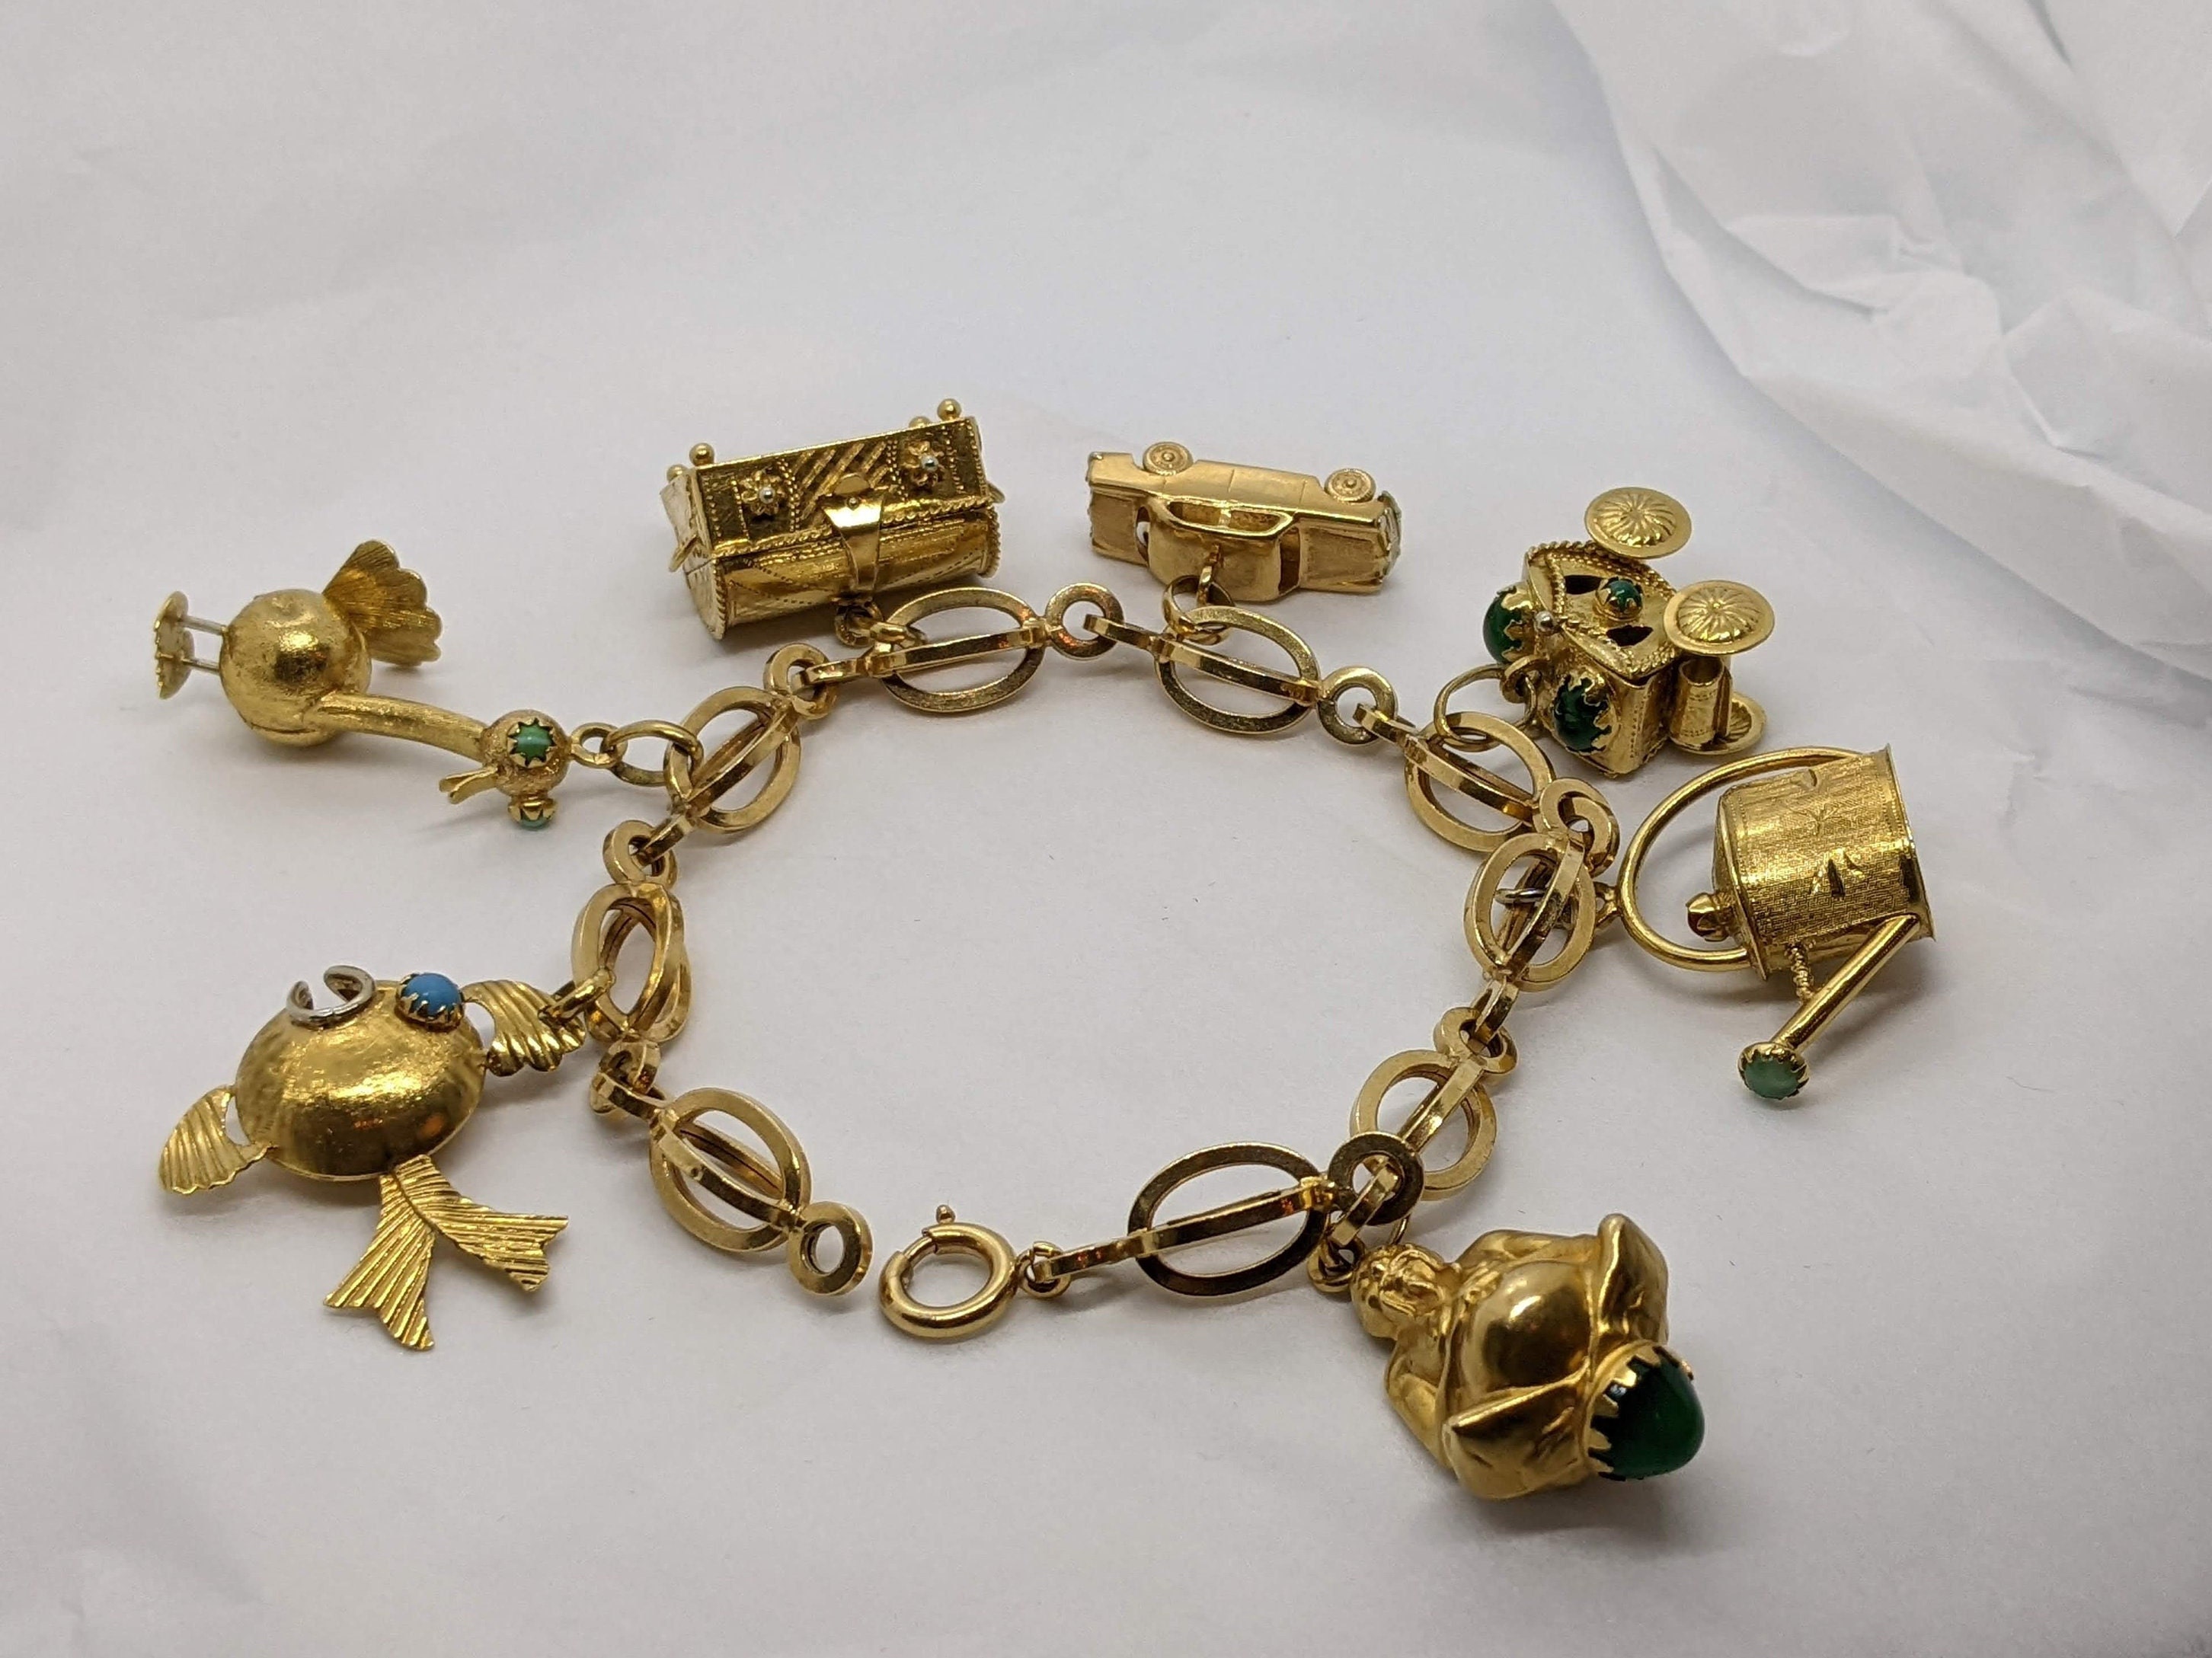 Ornate Gold Plated Charm Bracelet with 15 Charms